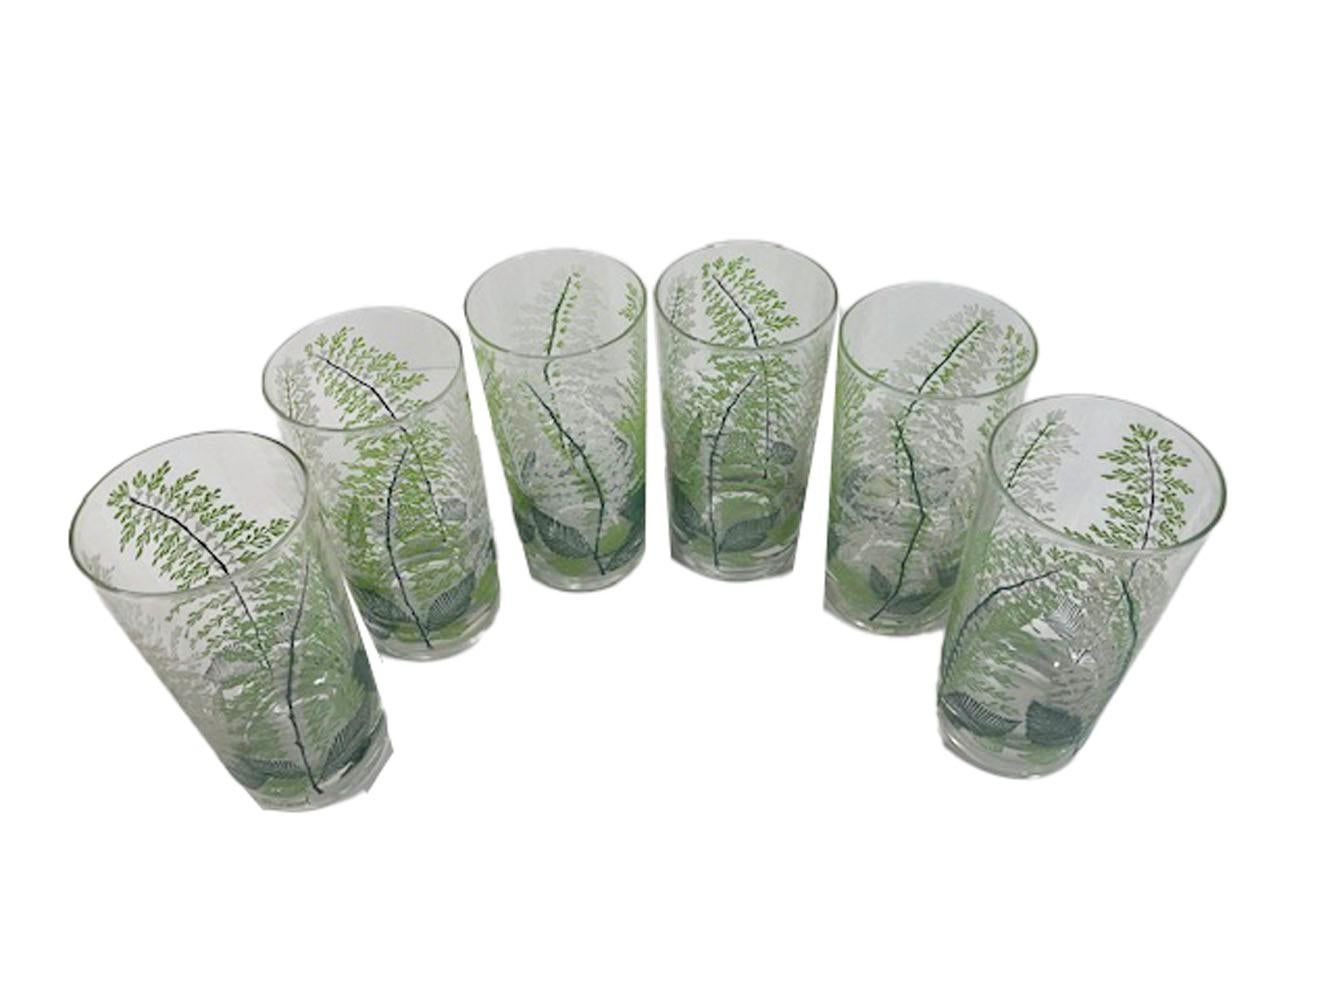 Set of 6 hard to find Georges Briard designed highball glasses with green and white fern fronds. Bright green and white enamel fern fronds rise up the sides of the glass above dark green leaves at the base.